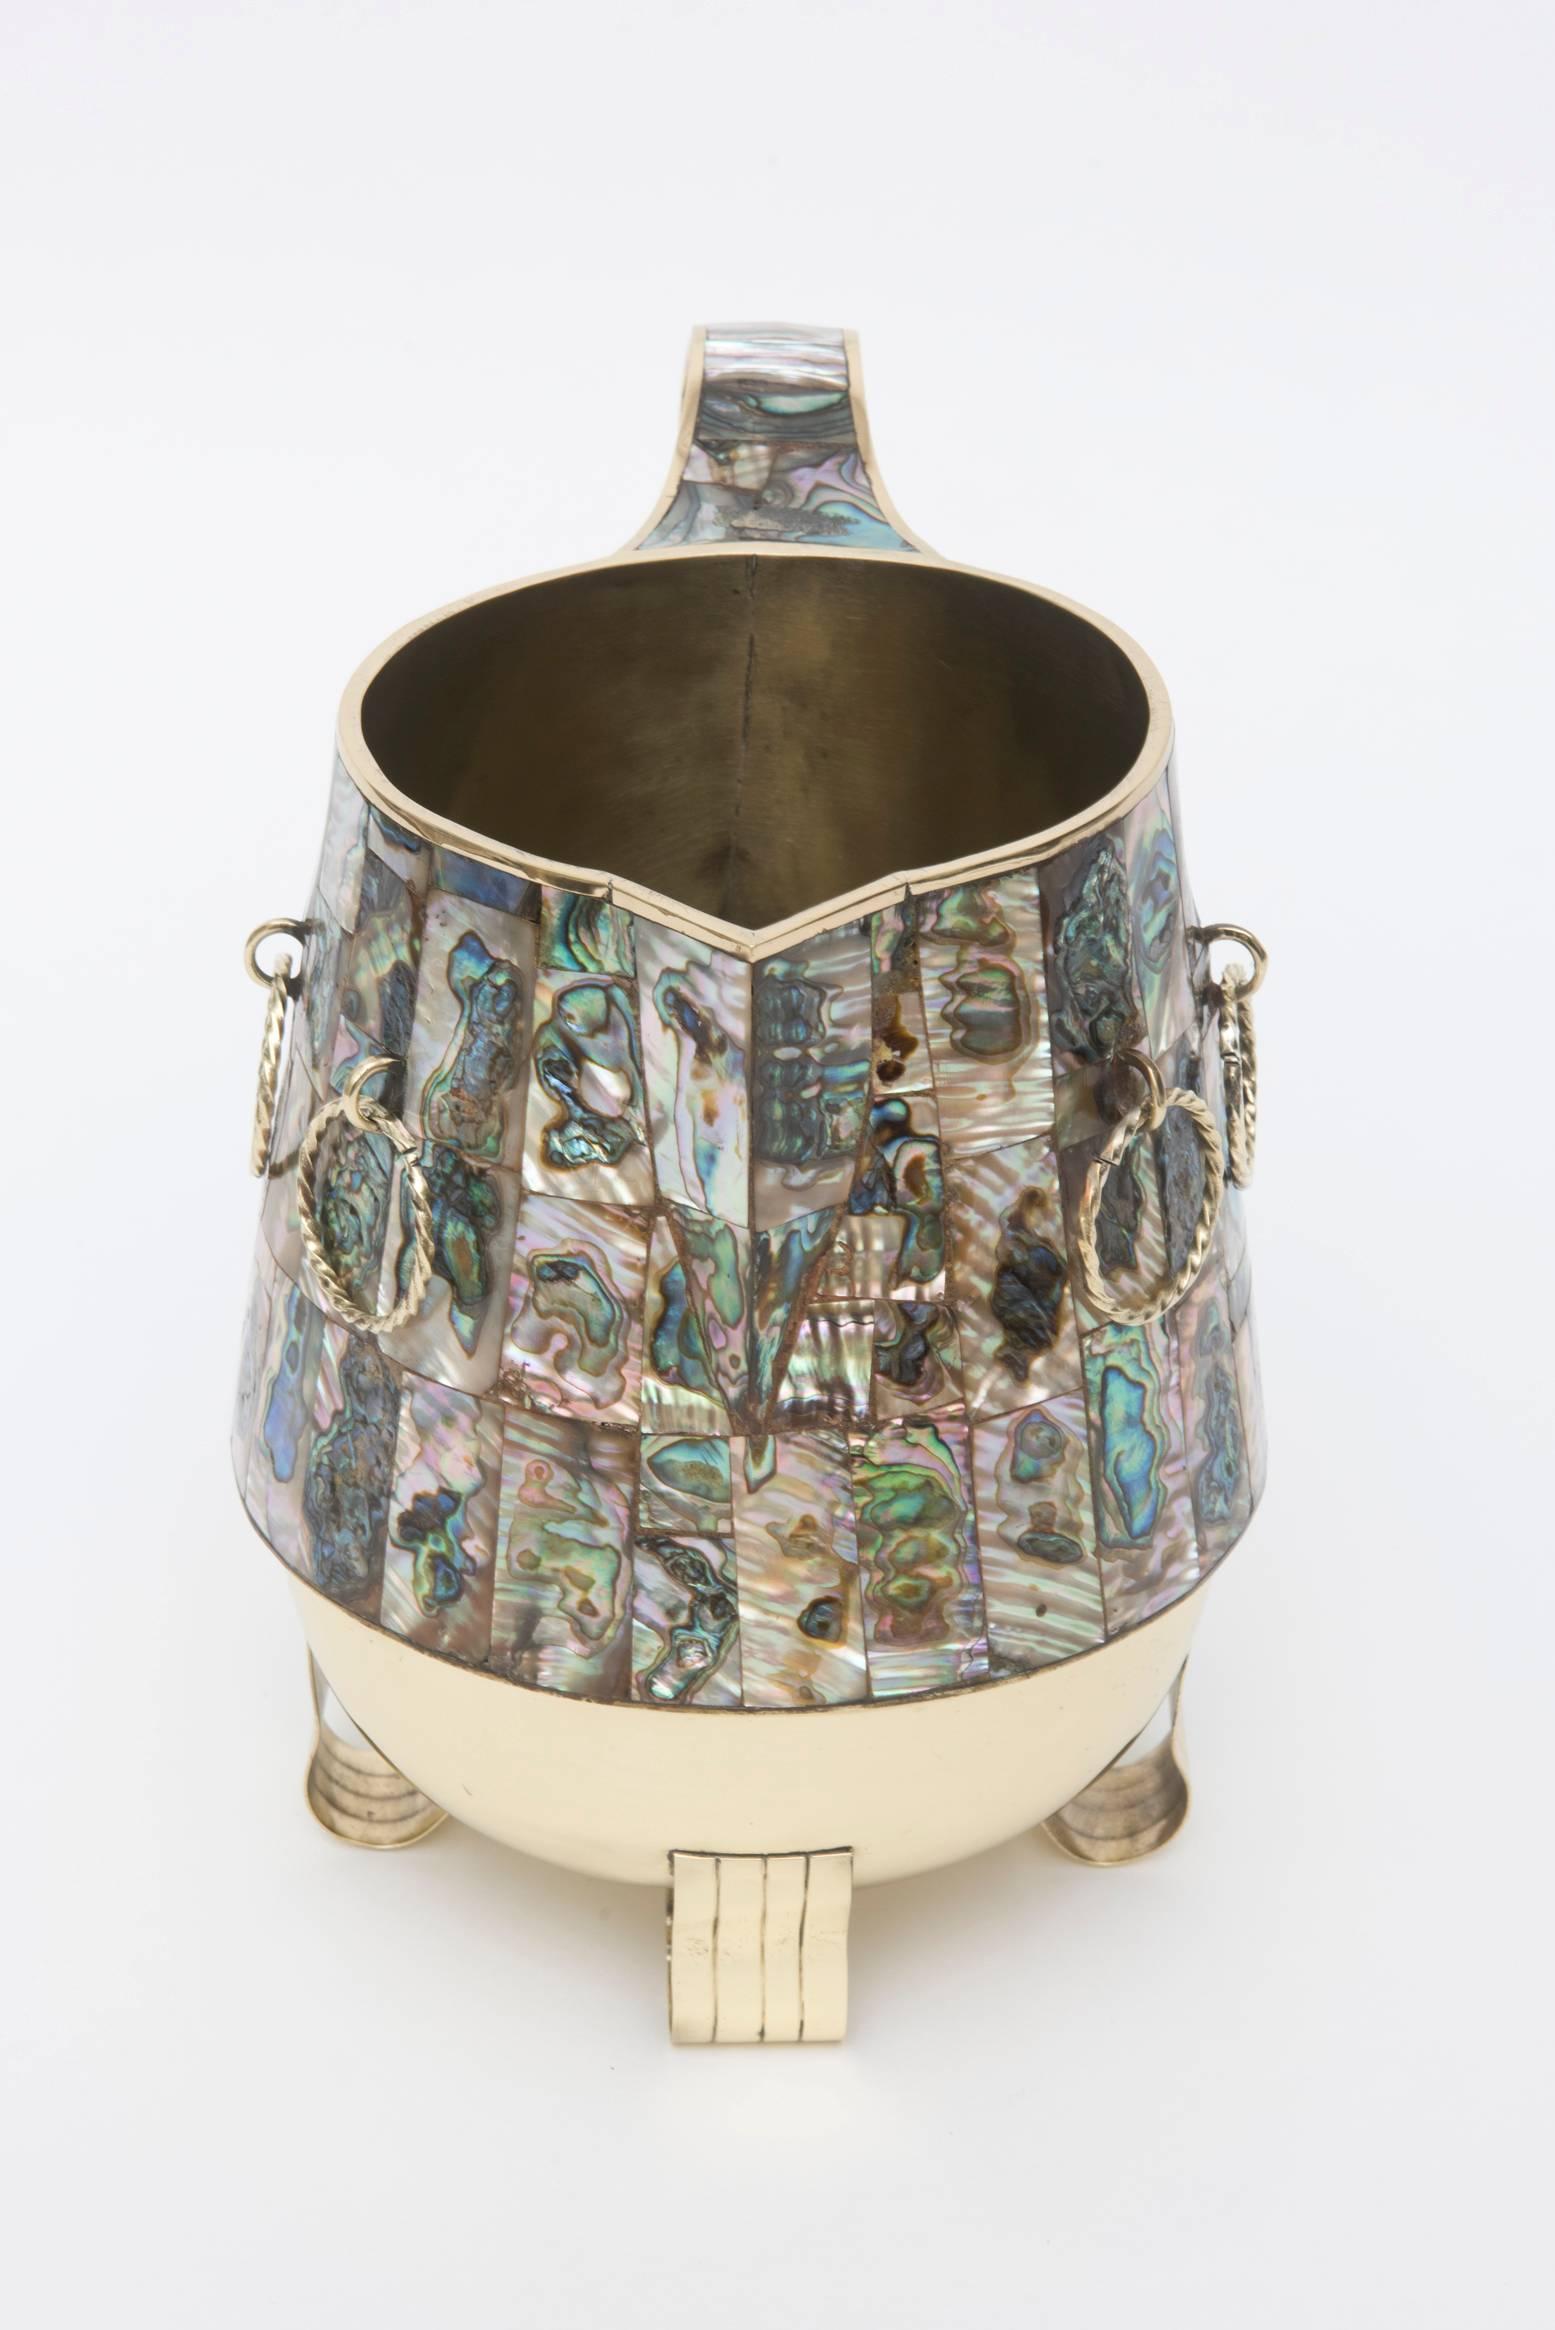 This wonderful combination of abalone and polished brass pitcher or vase, vessel or object is signed on the bottom Hecho En Mexico. It is vintage and has the look of the lined Tommi Parzinger style on the modern feet. The 6 brass roped rings